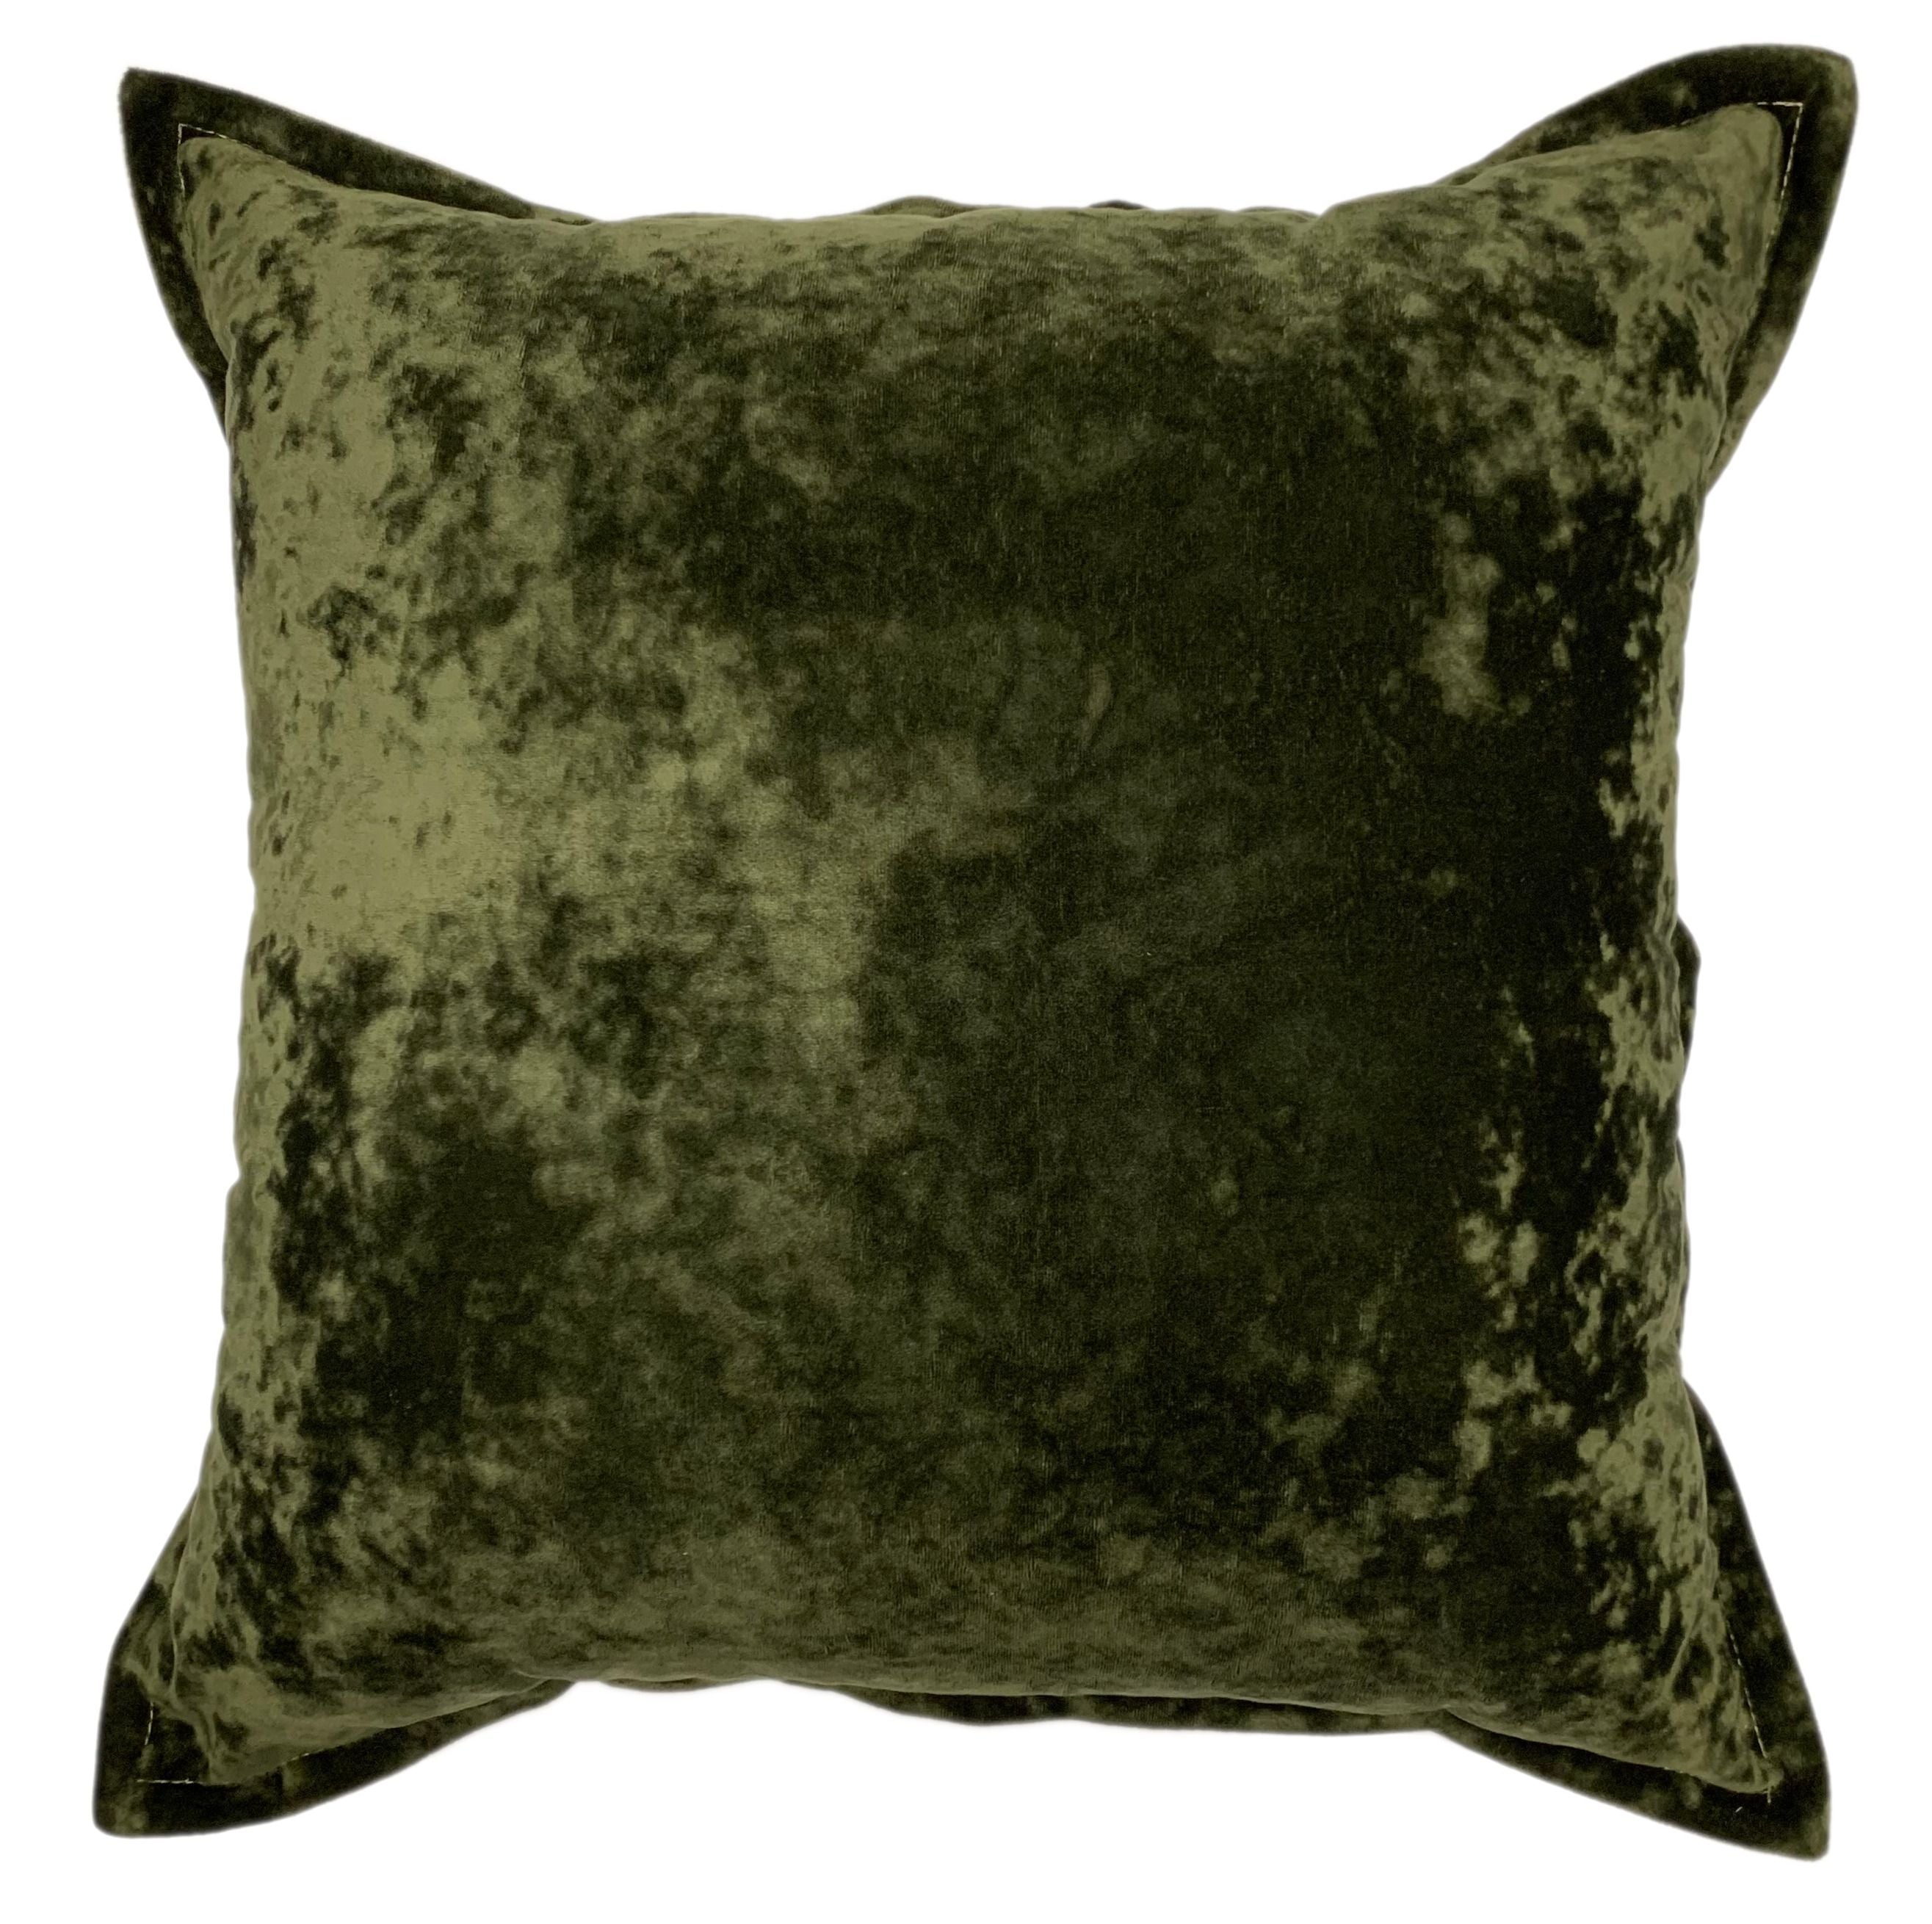 Crushed Olive Cushion - MHF Decor-Delights